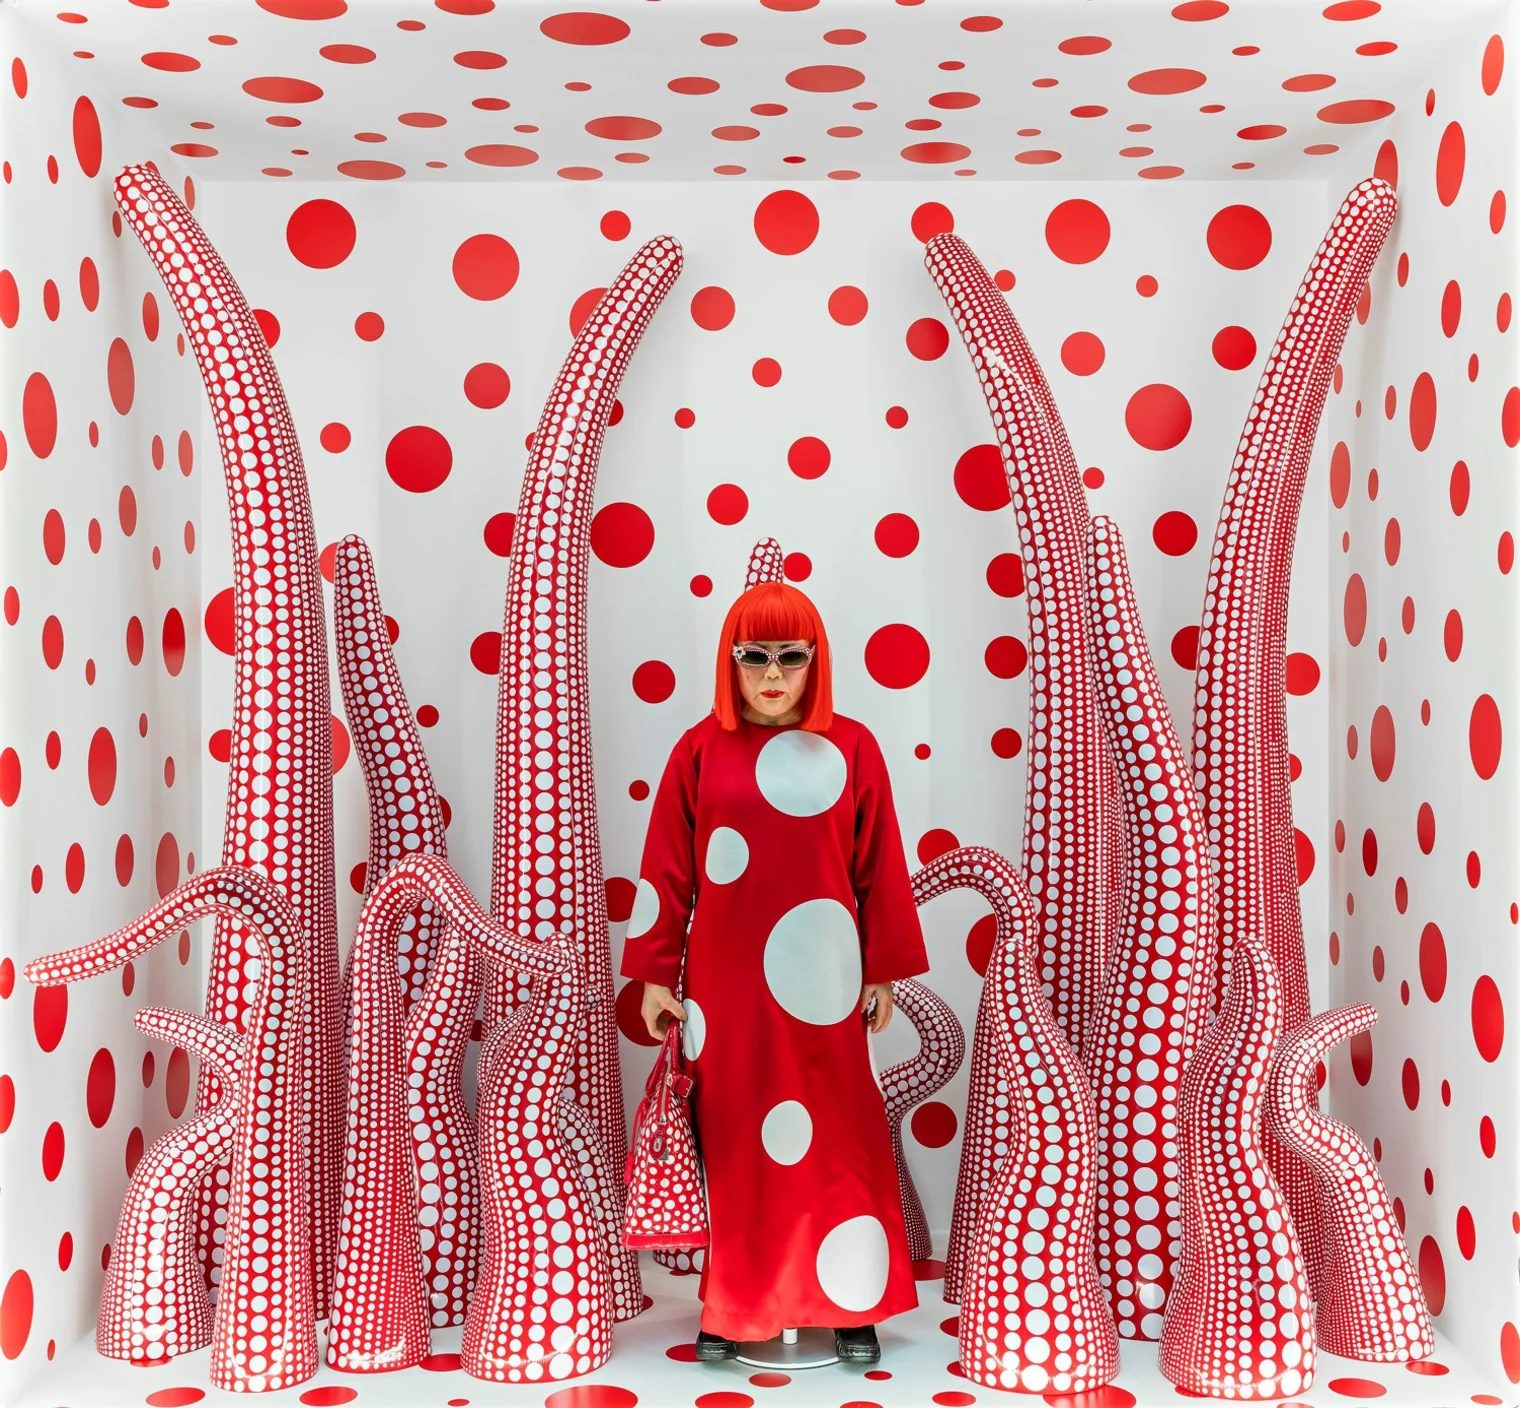 A woman in a red wig and a red dress with large white circles is standing inside a box. She is surrounded by large tentacles protruding from the floor.